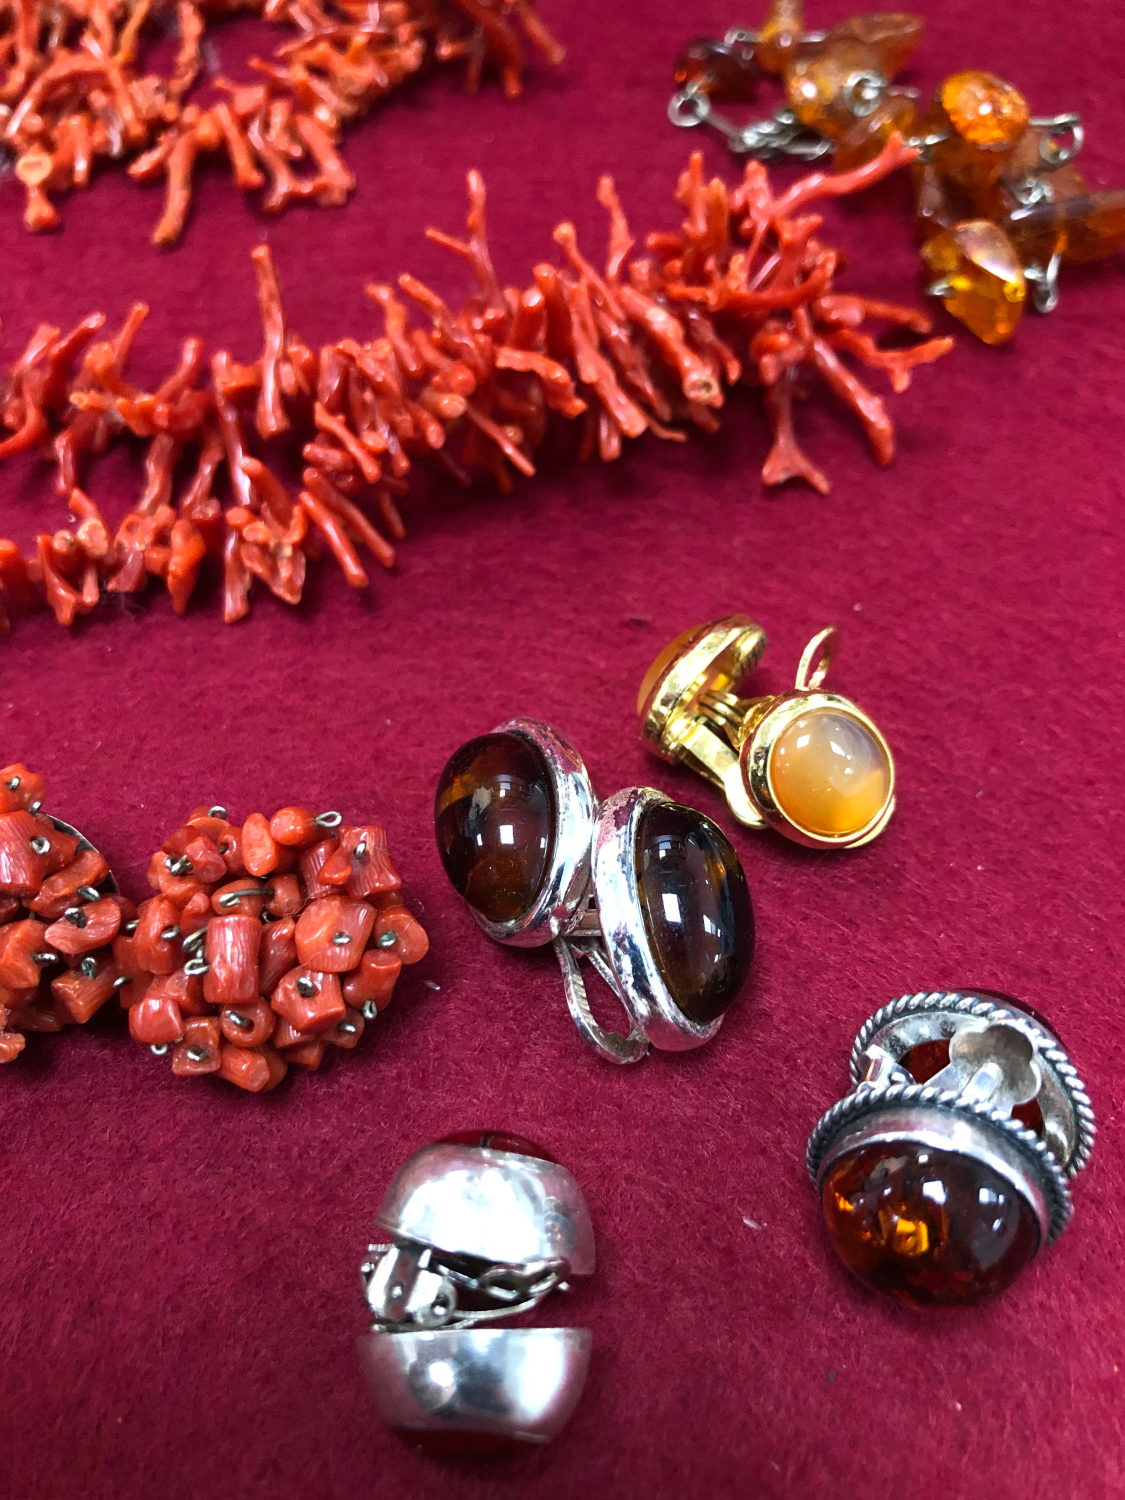 A QUANTITY OF AMBER,CORAL, RESIN AND OTHER JEWELLERY SOME PIECES SET IN SILVER. - Image 4 of 5